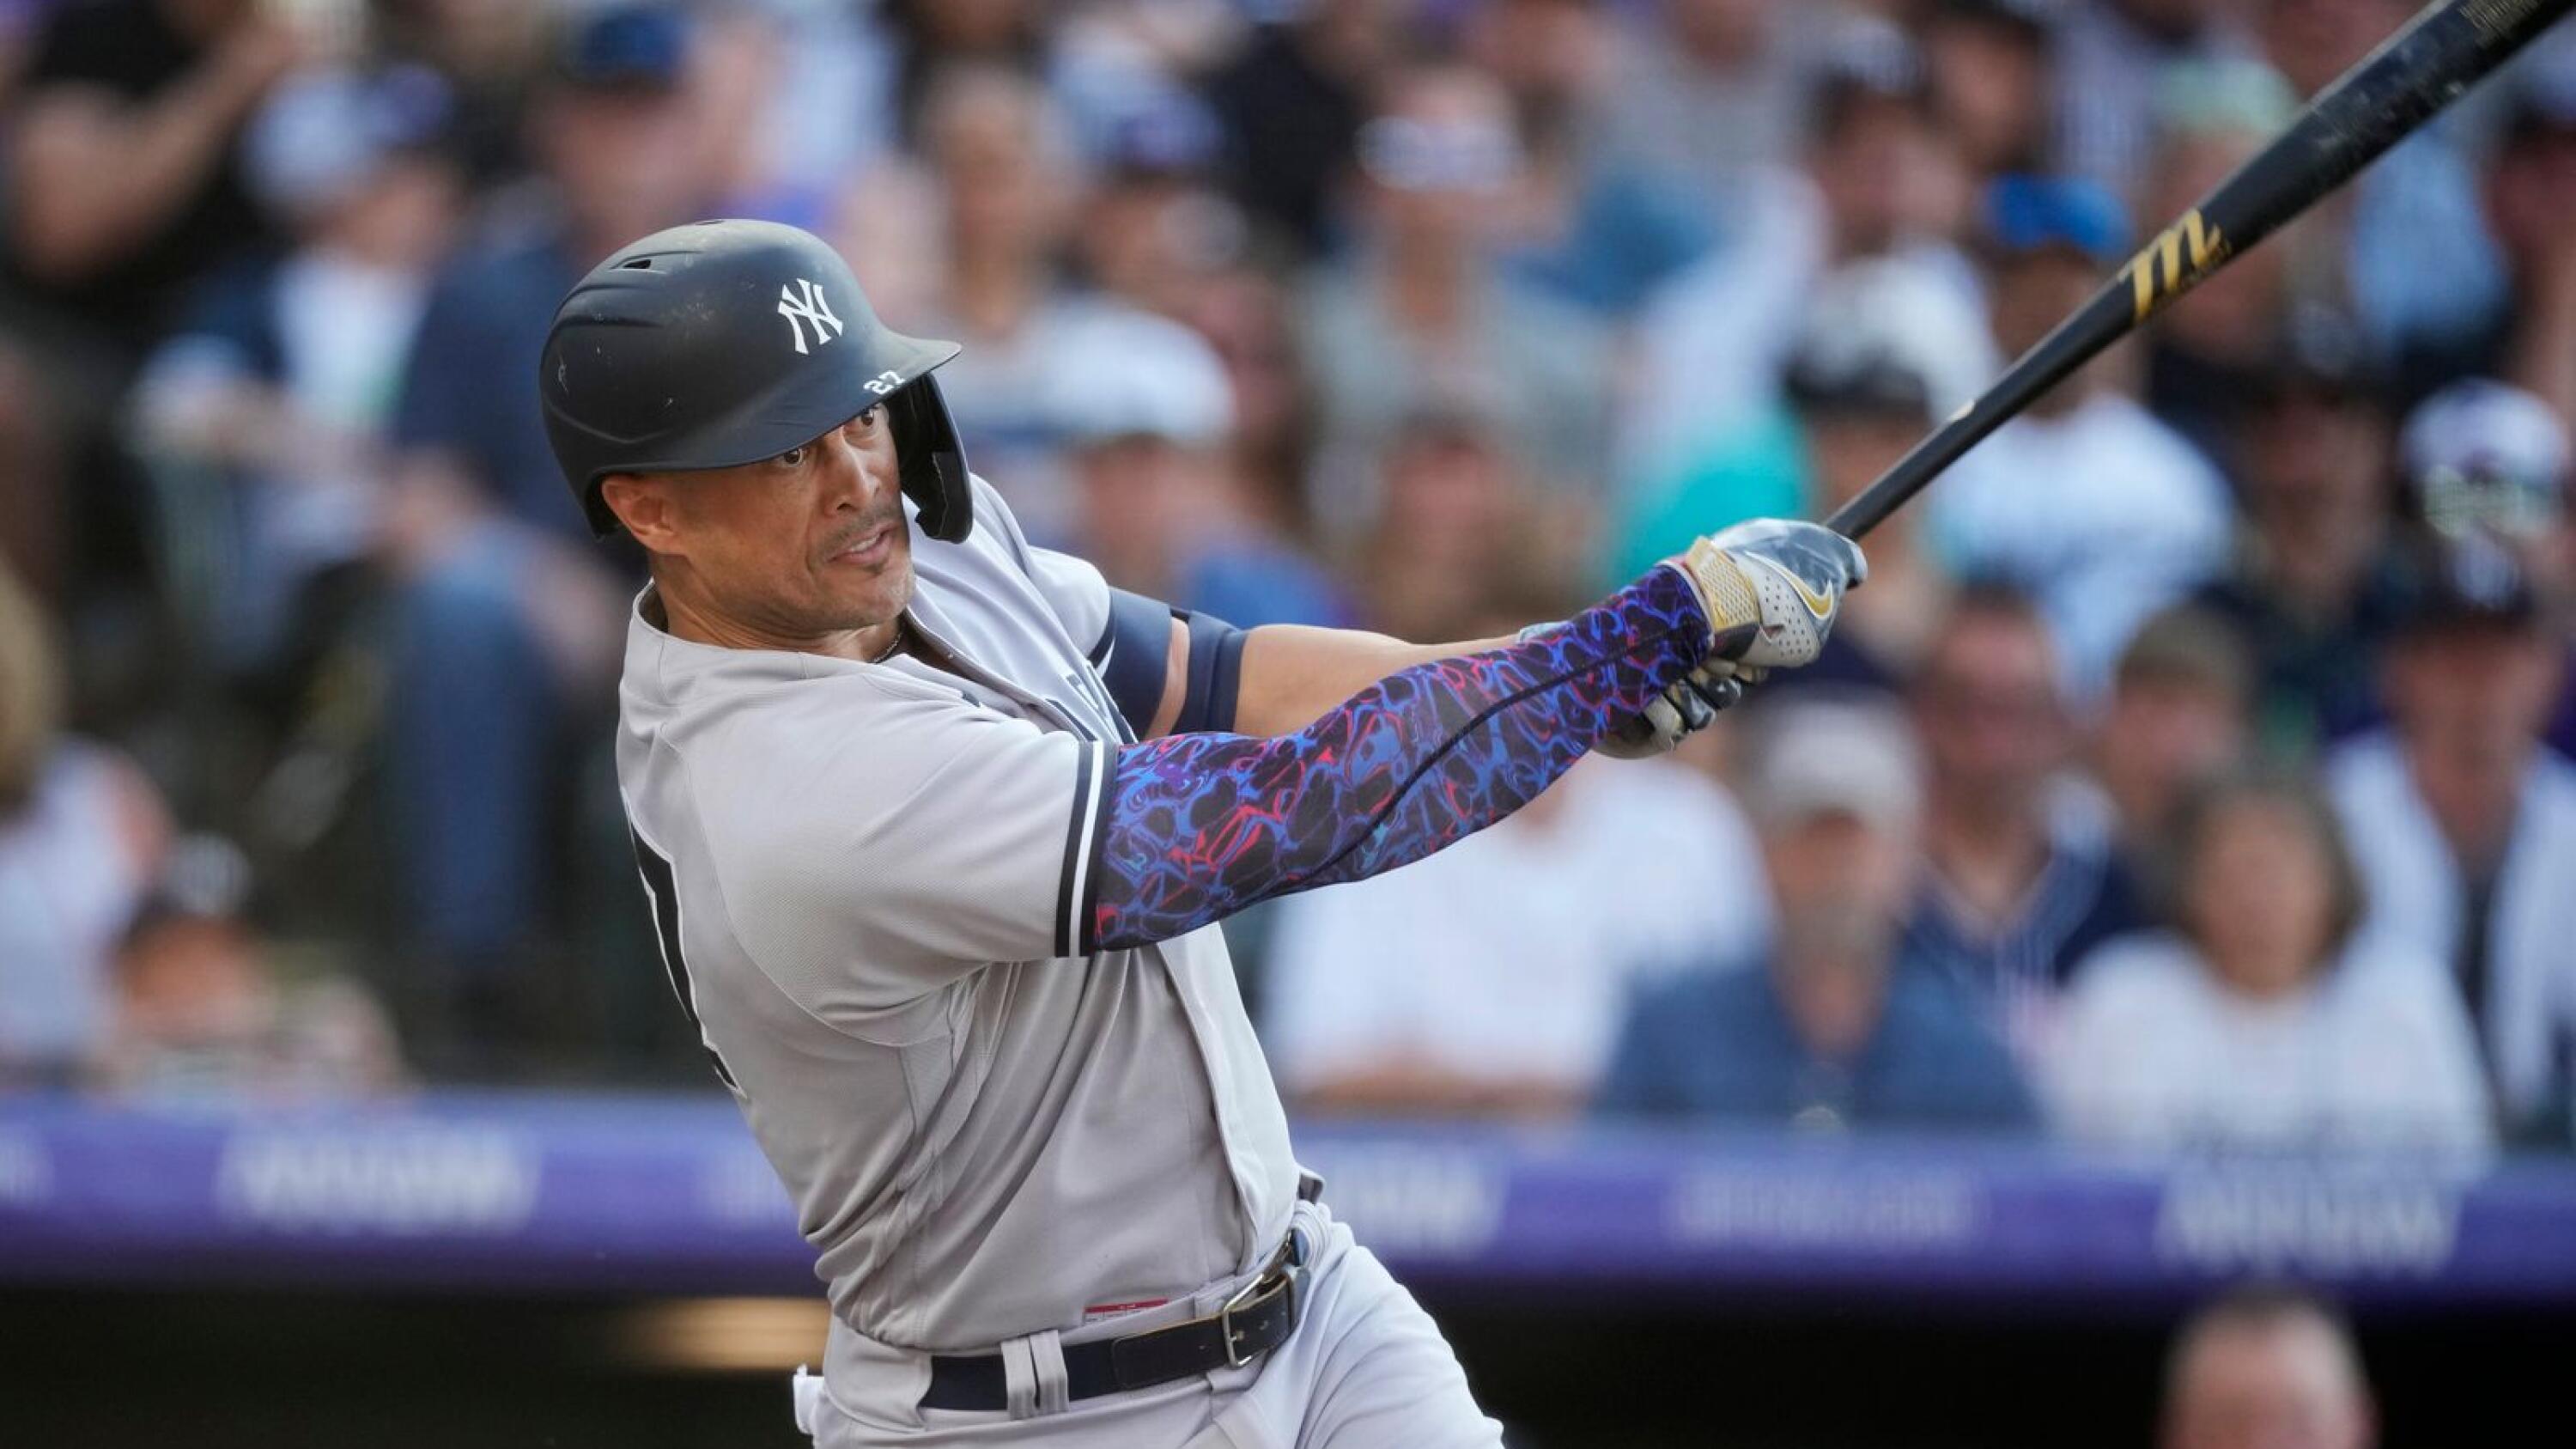 Giancarlo Stanton of the New York Yankees swings the bat during